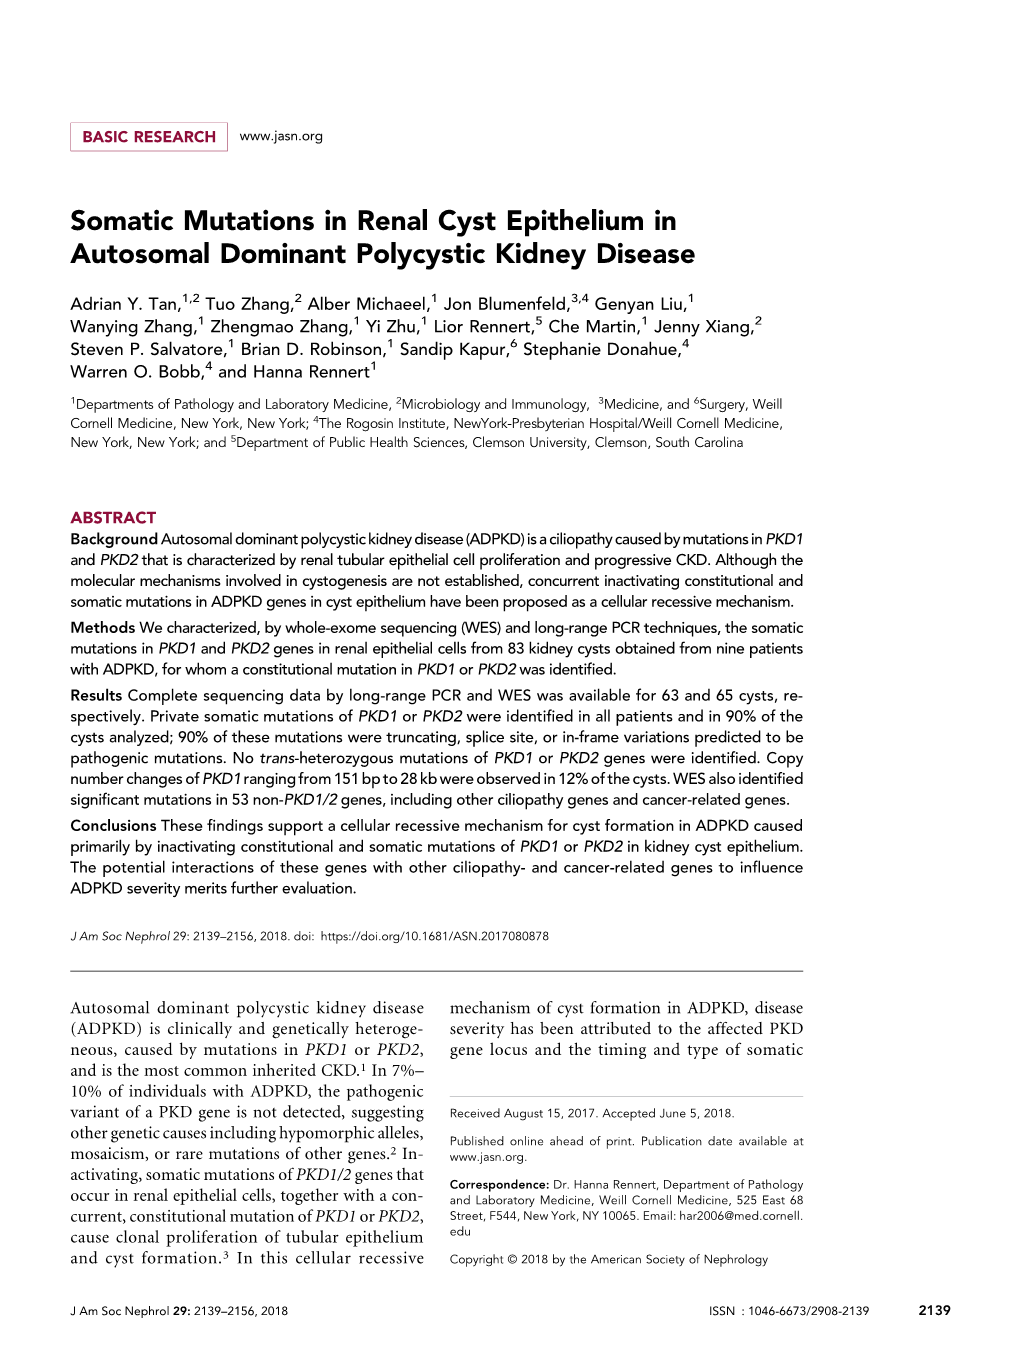 Somatic Mutations in Renal Cyst Epithelium in Autosomal Dominant Polycystic Kidney Disease